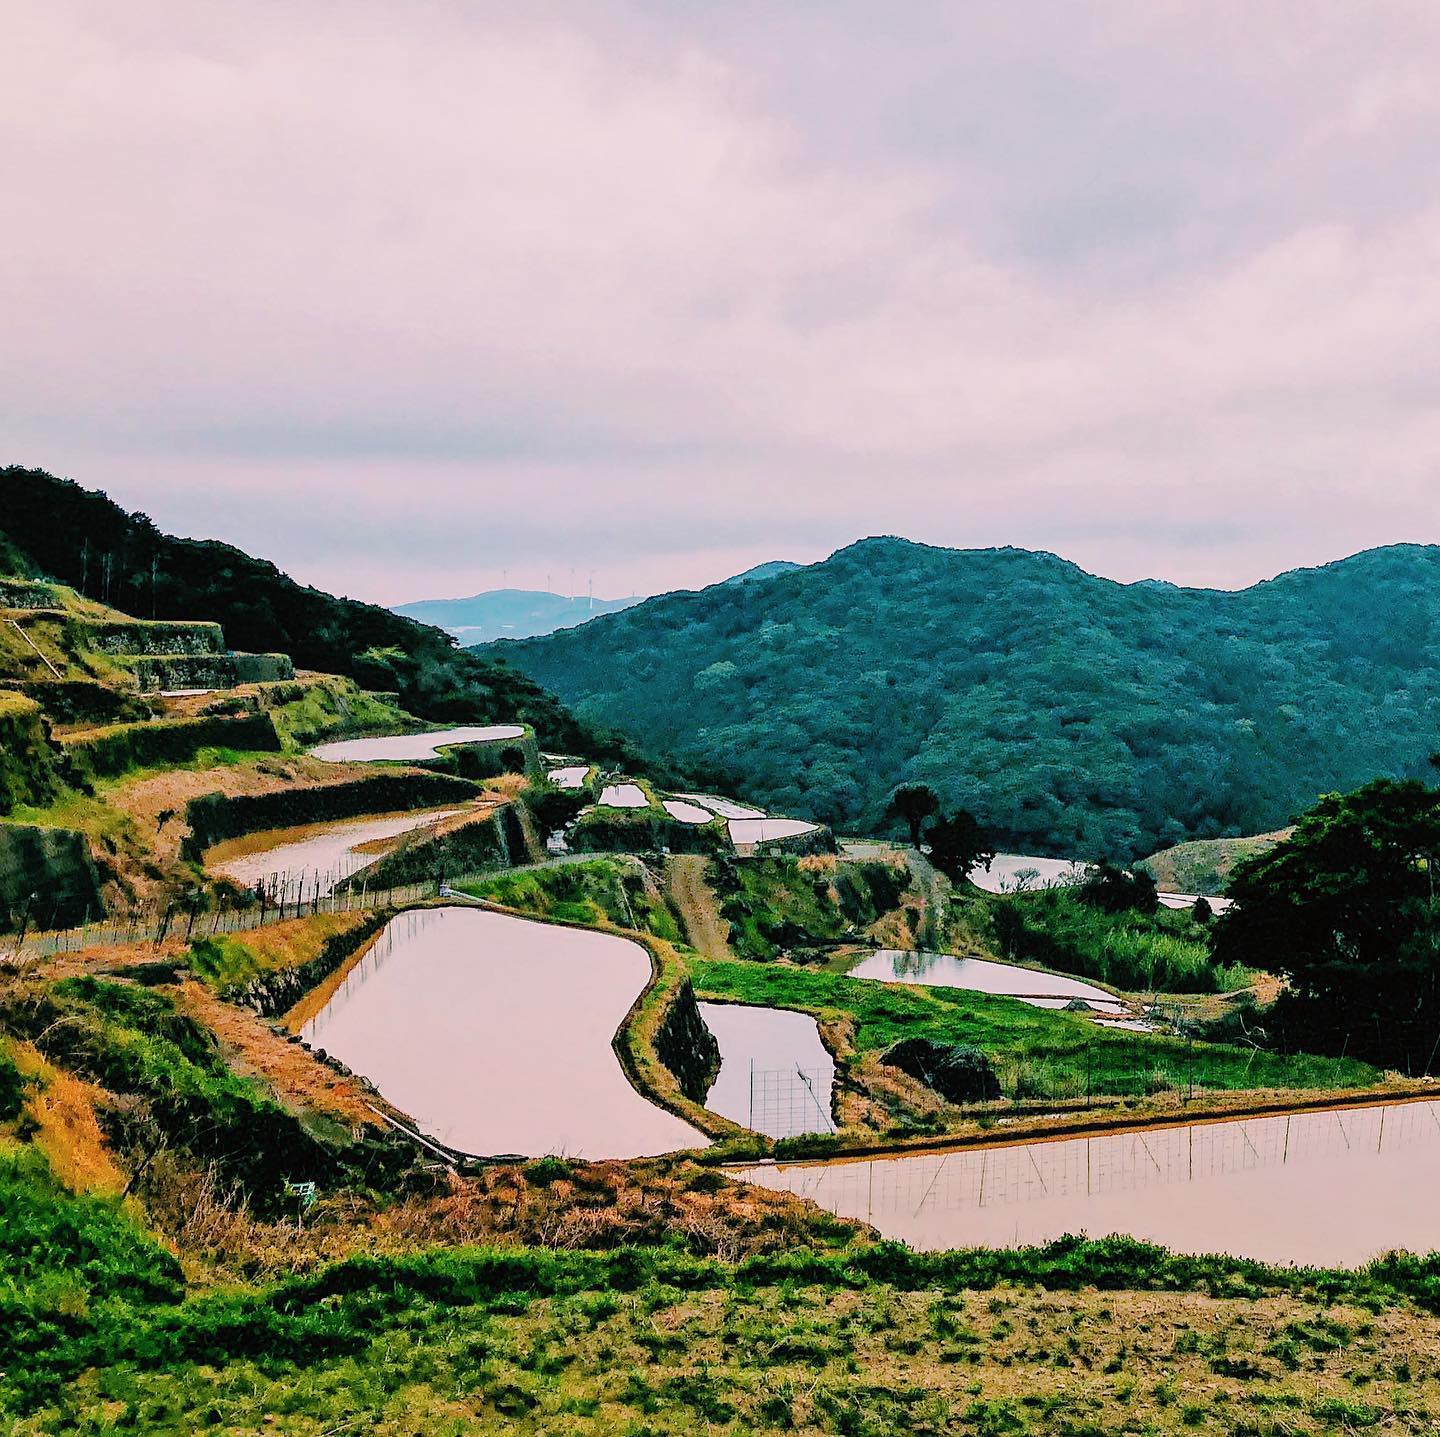 _﻿⁣⁣⁣
Here's this week's update of from AOI Global at Doya-tanada in Nagasaki prefecture (photo taken pre Covid-19).⁣
⁣⁣
Tanadas are terraced rice fields found in Japan’s mountainous countryside, where agriculture has been active for thousands of years. They were created in order to grow as much rice as possible in a small area. Many photographers gather to shoot the mystical sunsets at Doya-tanada. ⁣
⁣
REMOTE SHOOT In Japan with AOI Pro. Global!⁣⁣⁣
Contact us for details through the link in our bio.⁣⁣⁣
⁣⁣
#weeklyinspiration﻿